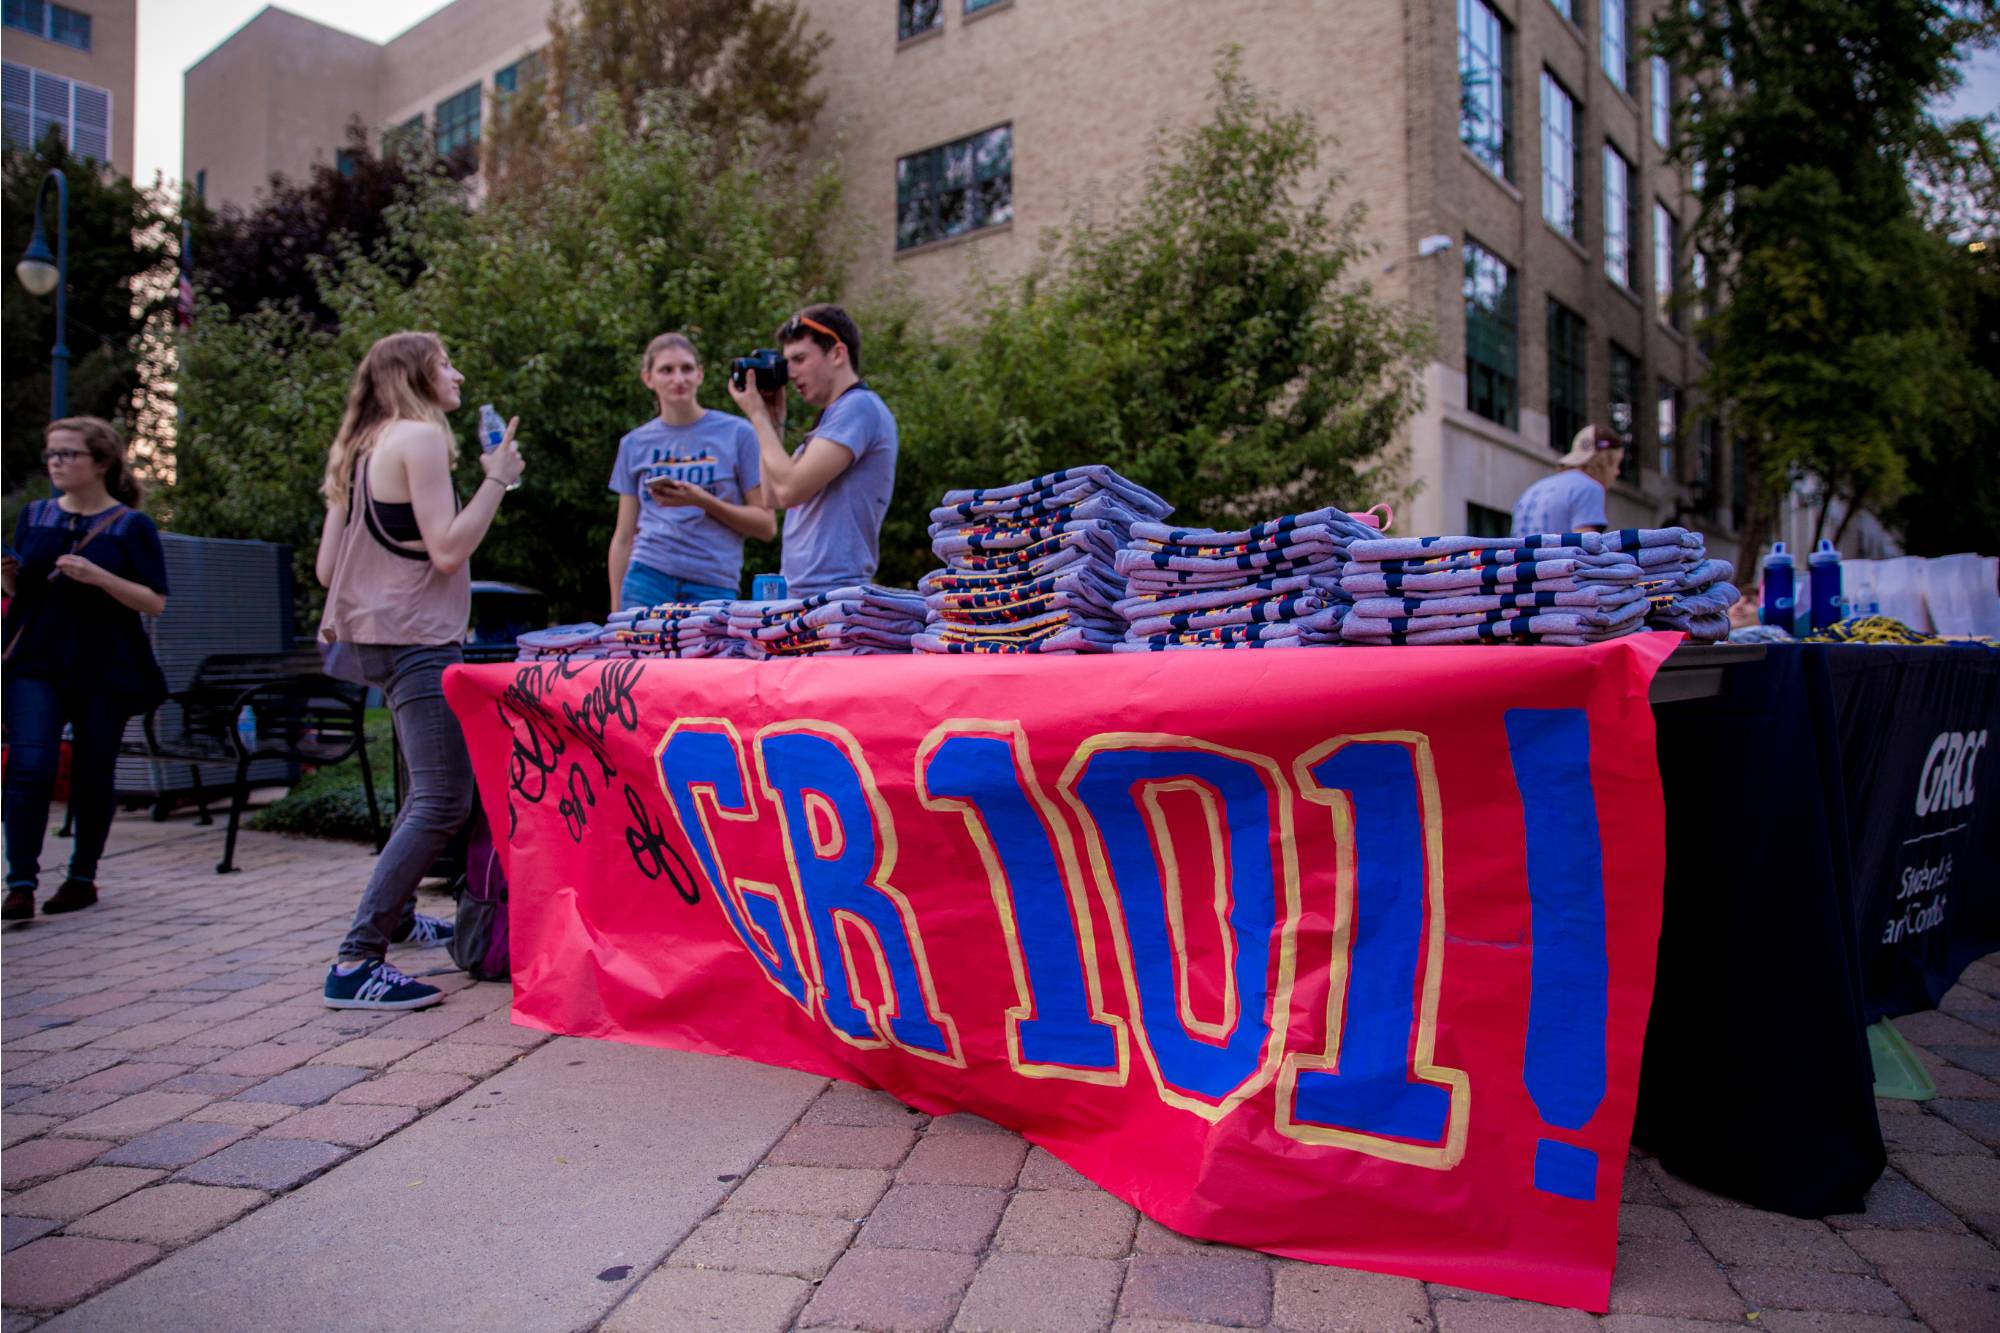 Table with t shirts and a banner displaying "GR 101"